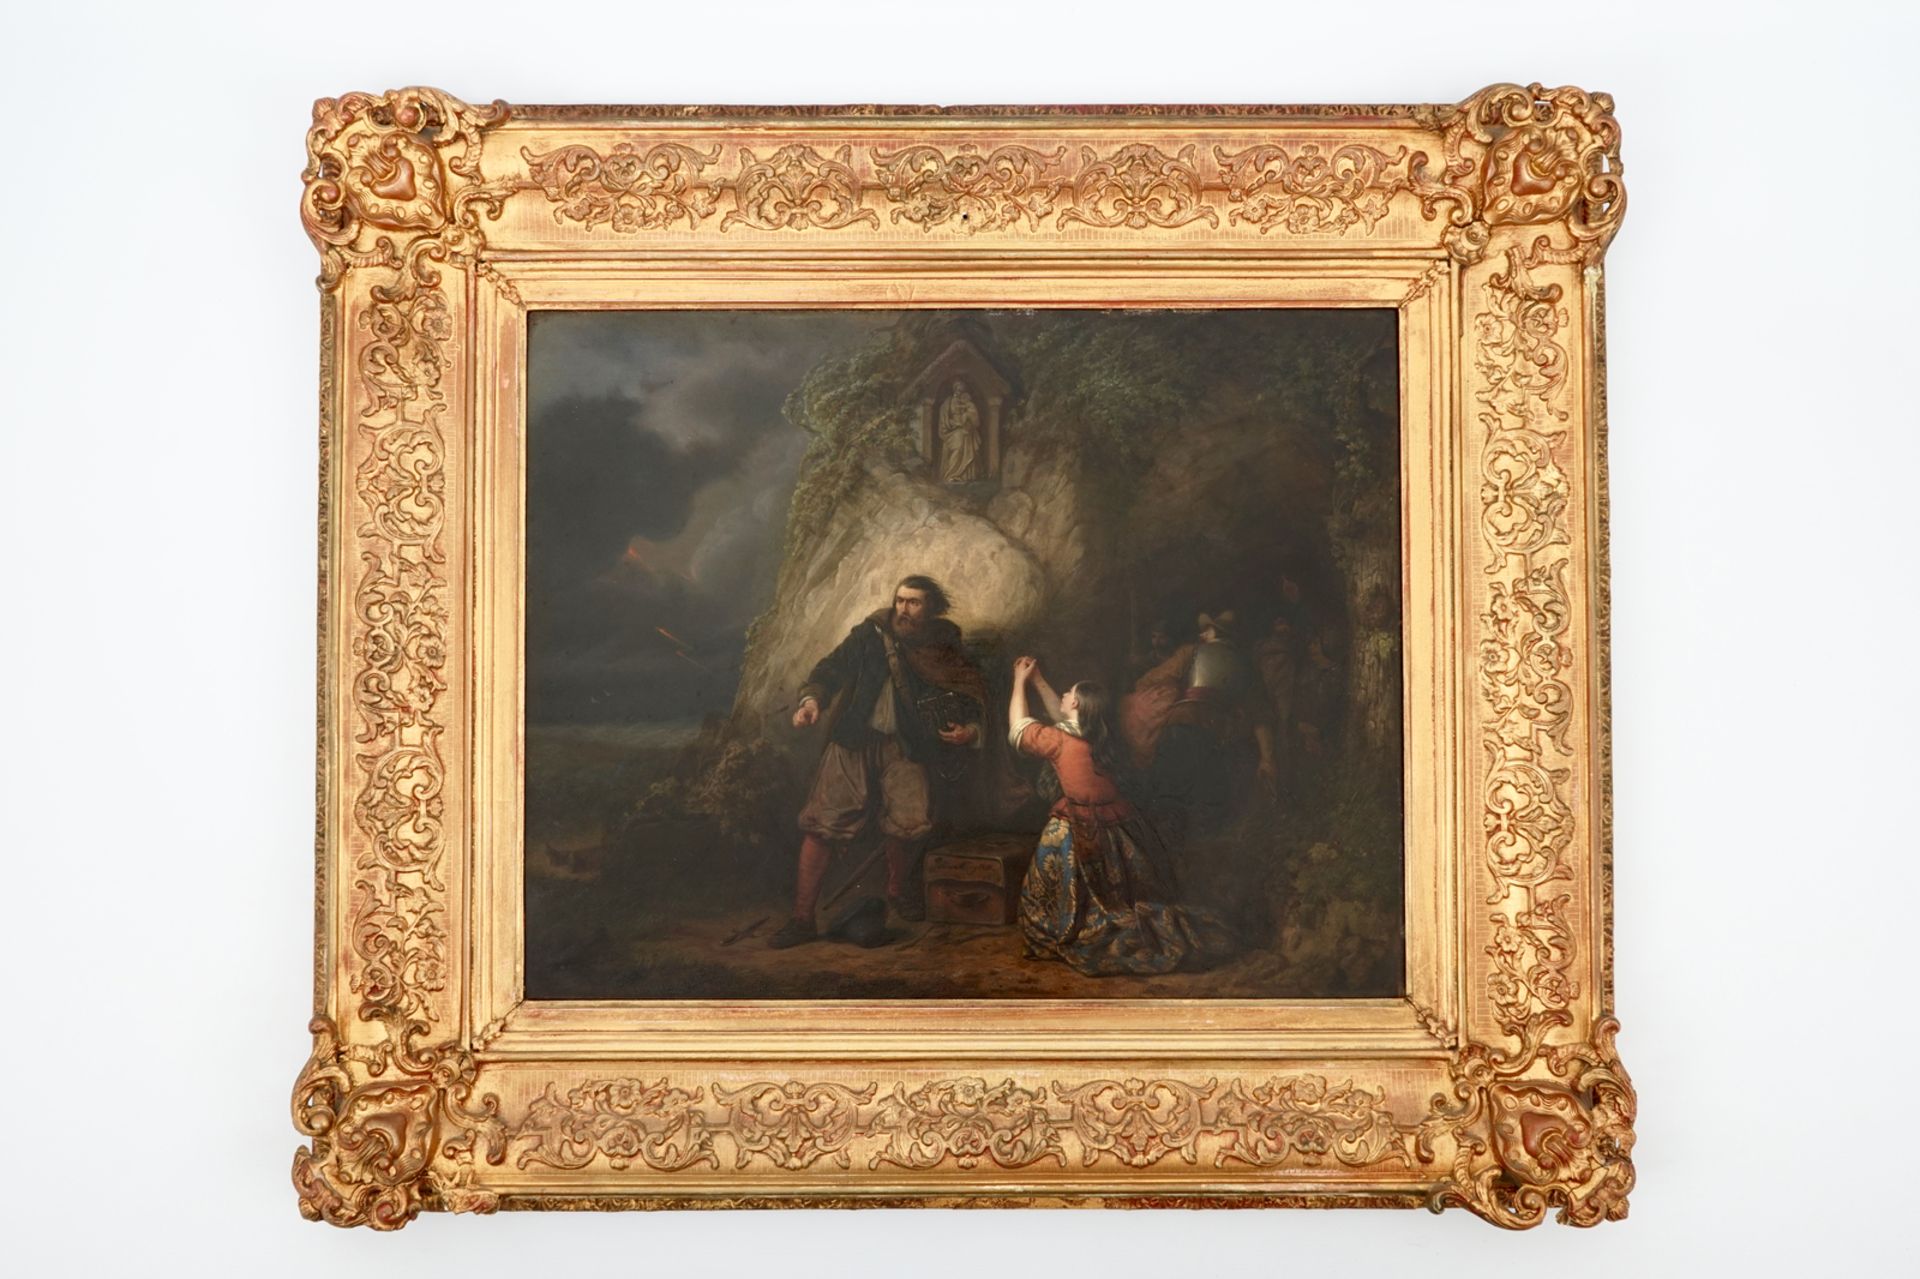 A coastal scene with soldiers, oil on panel, illegibly signed & dated 1850 Dim.: 90 x 77 cm (frame)